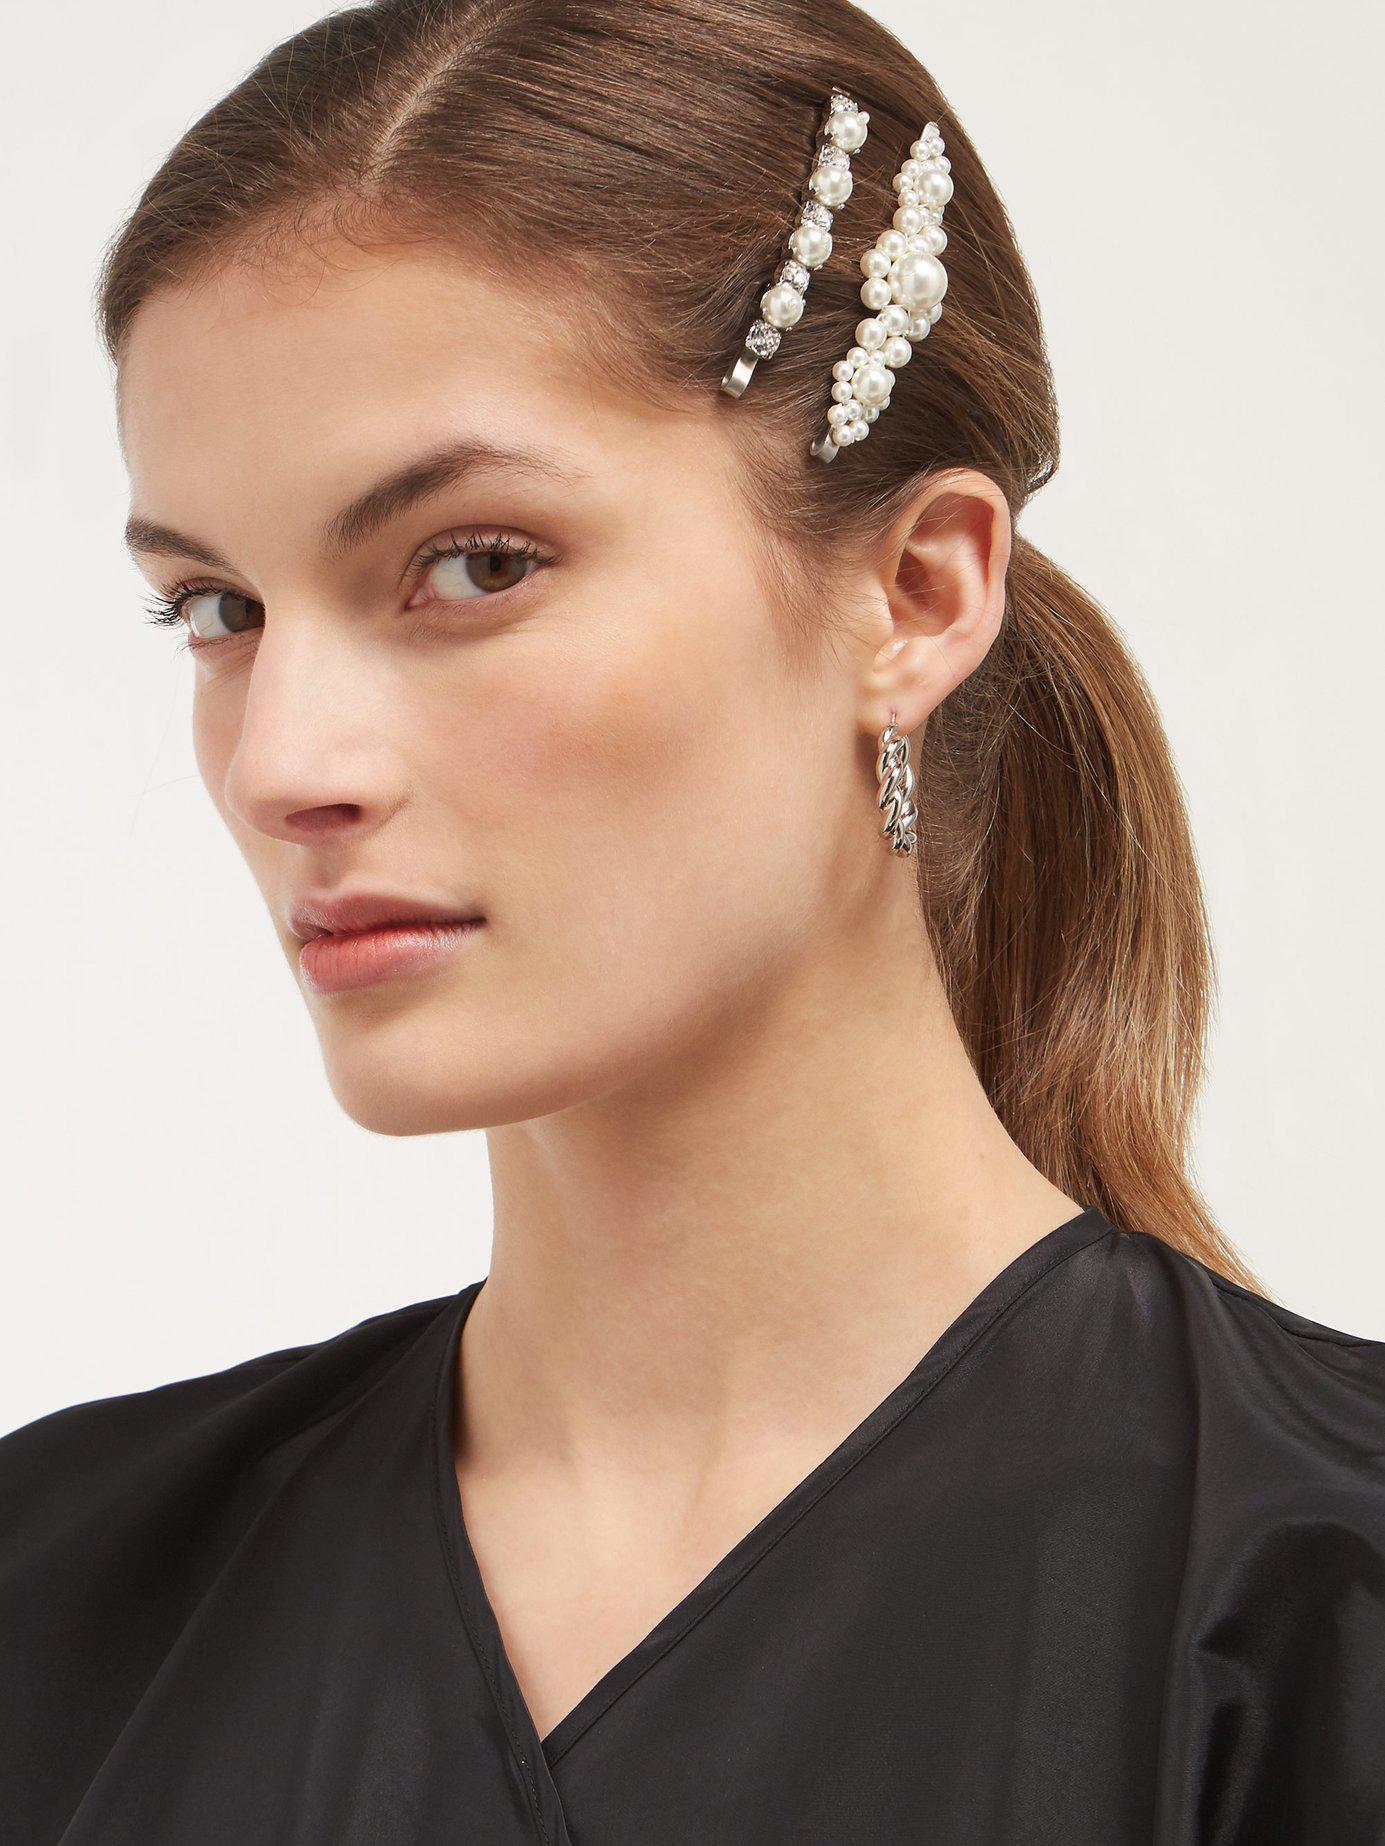 Simone Rocha Faux Pearl And Crystal Embellished Hair Clip - Lyst